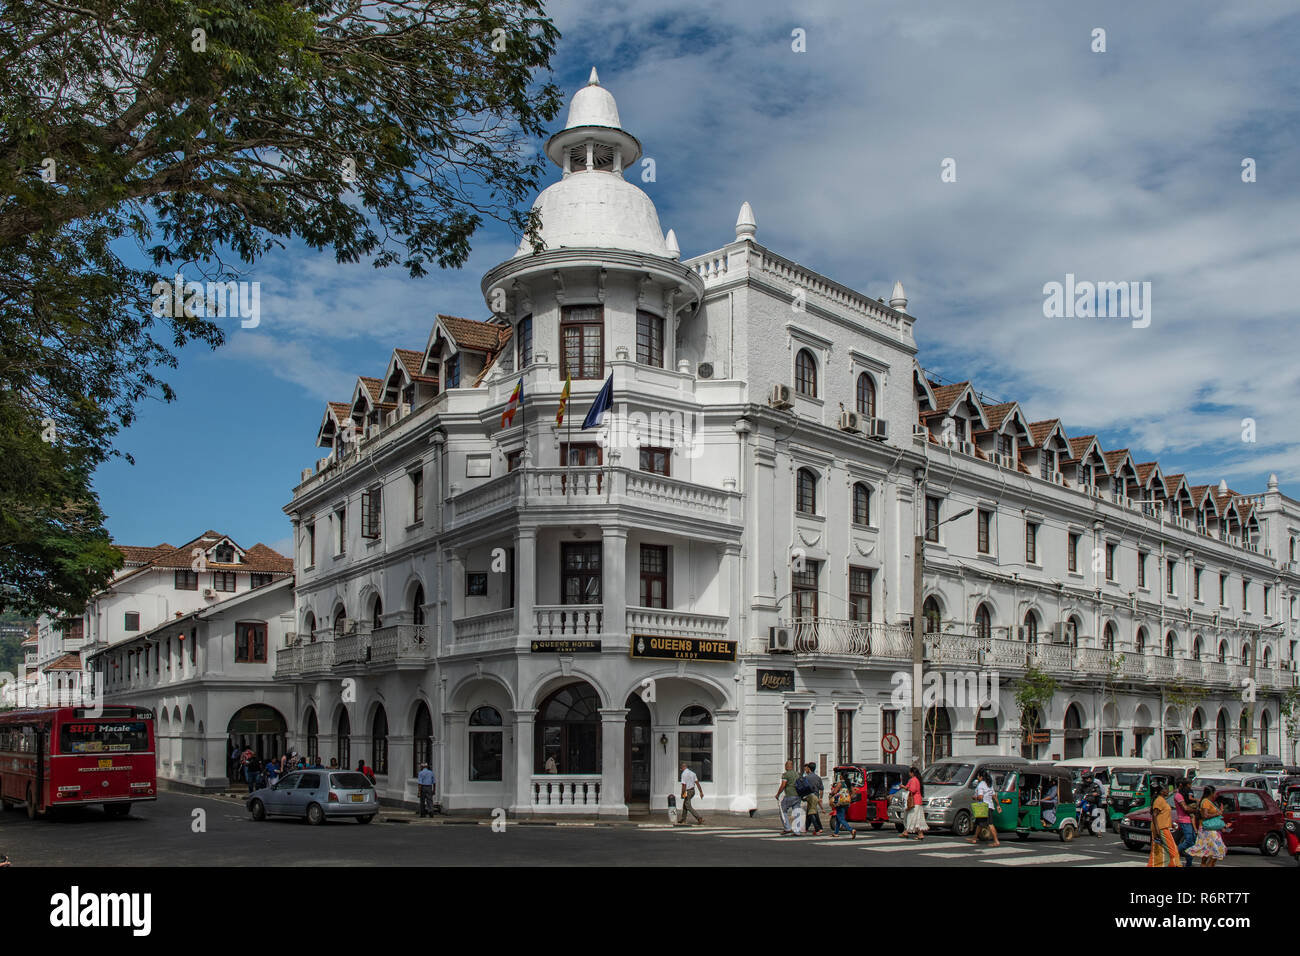 Queen's Hotel, Kandy, Sri Lanka Banque D'Images